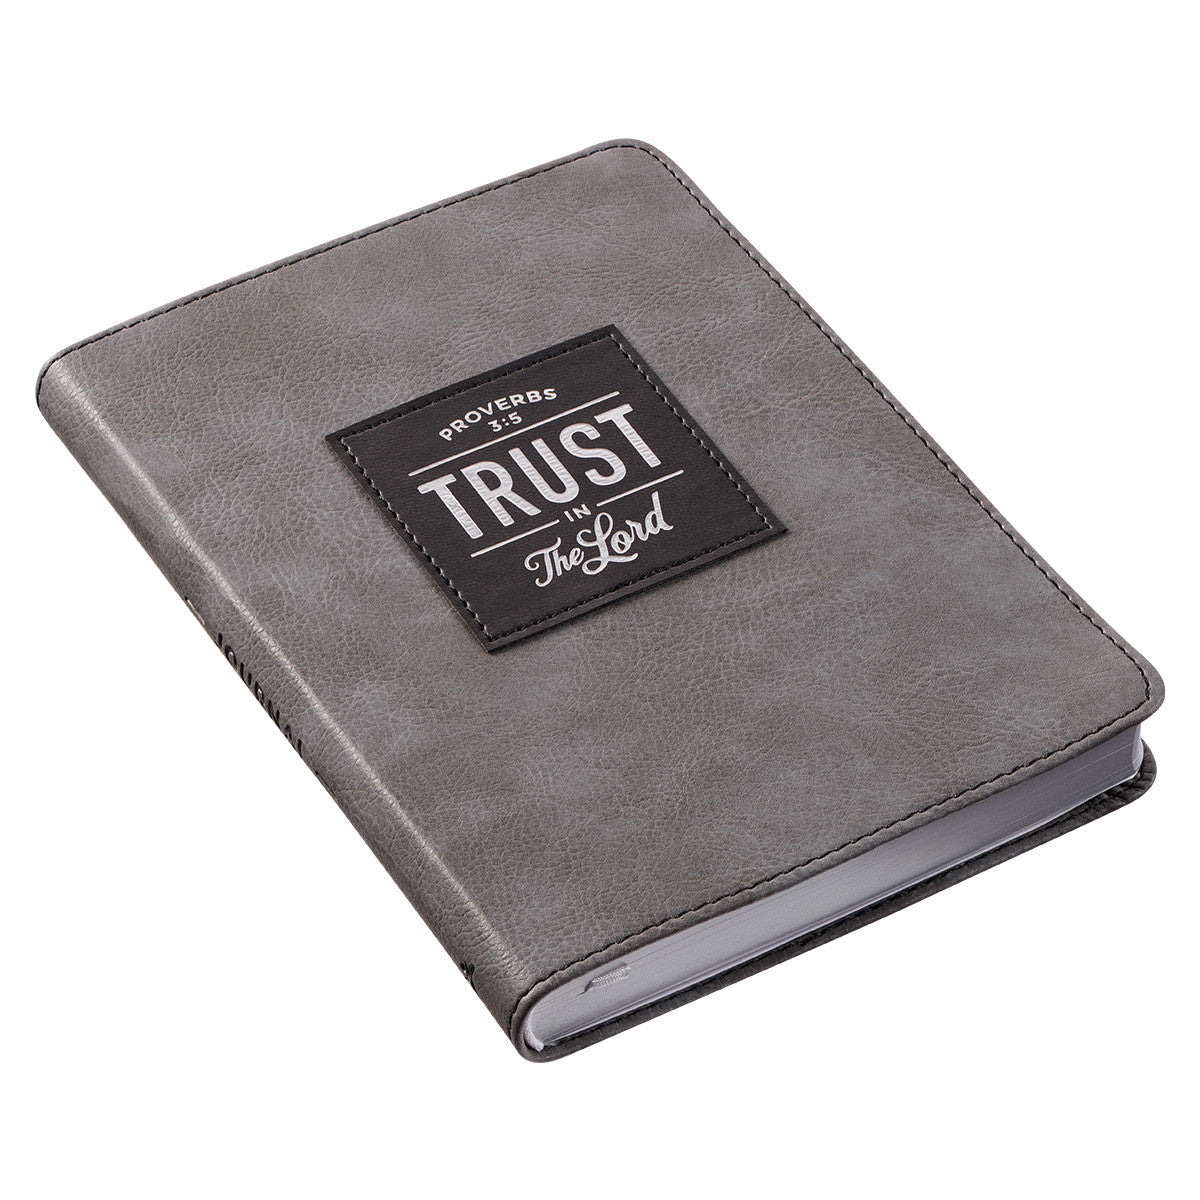 Trust in the LORD Grey Faux Leather Handy-sized Journal - Proverbs 3:5 - The Christian Gift Company